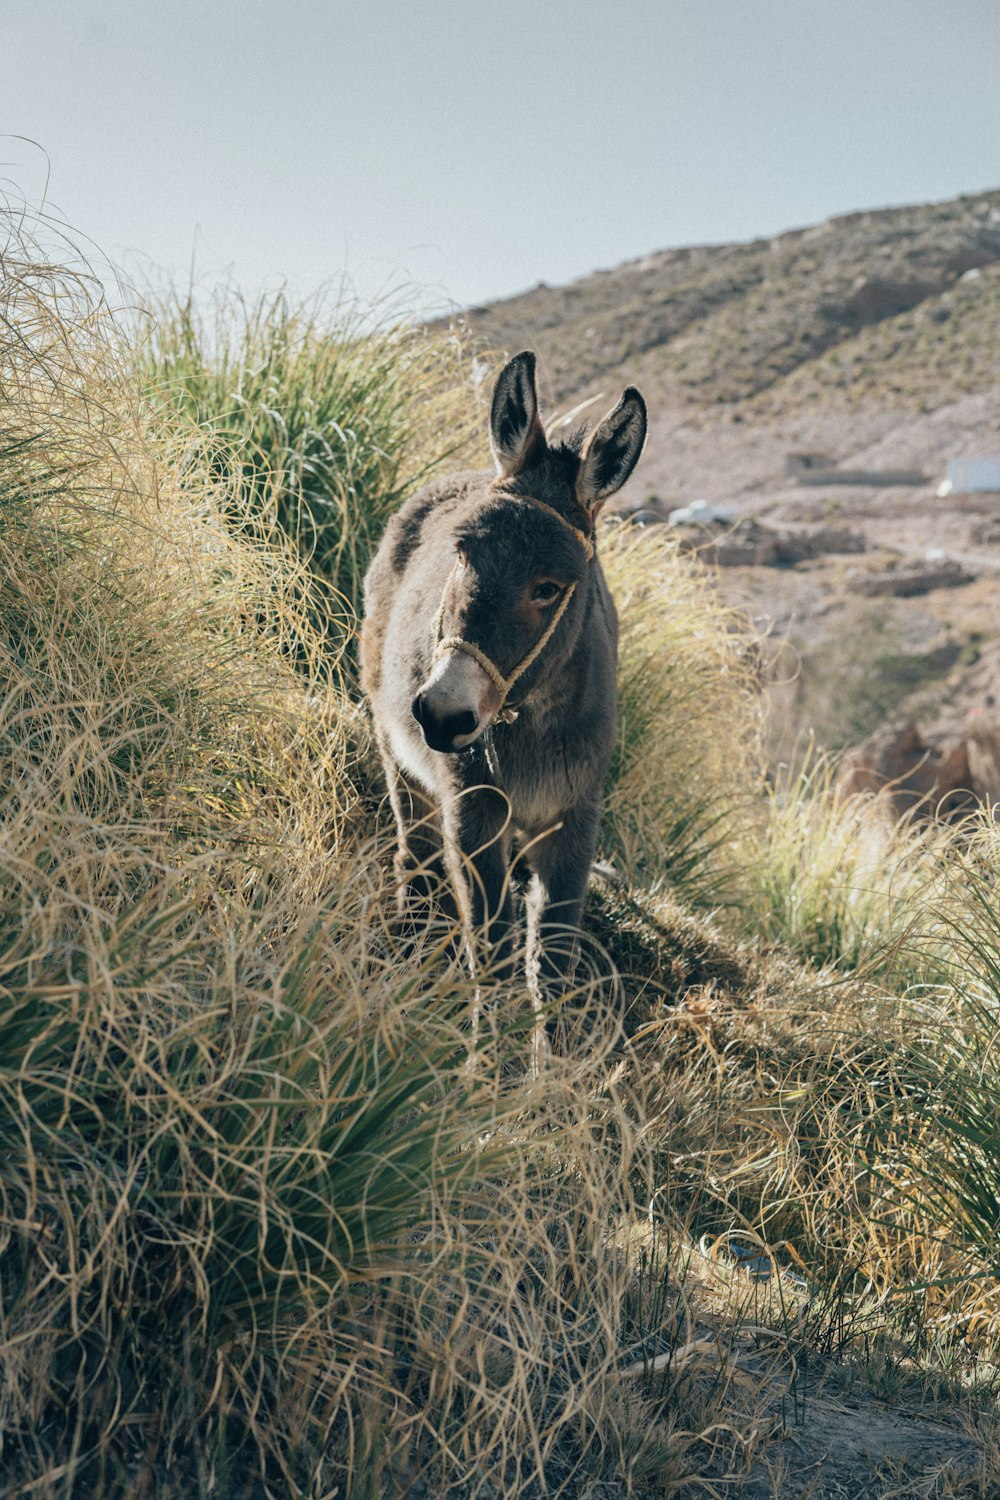 a donkey is standing in the grass on a hill